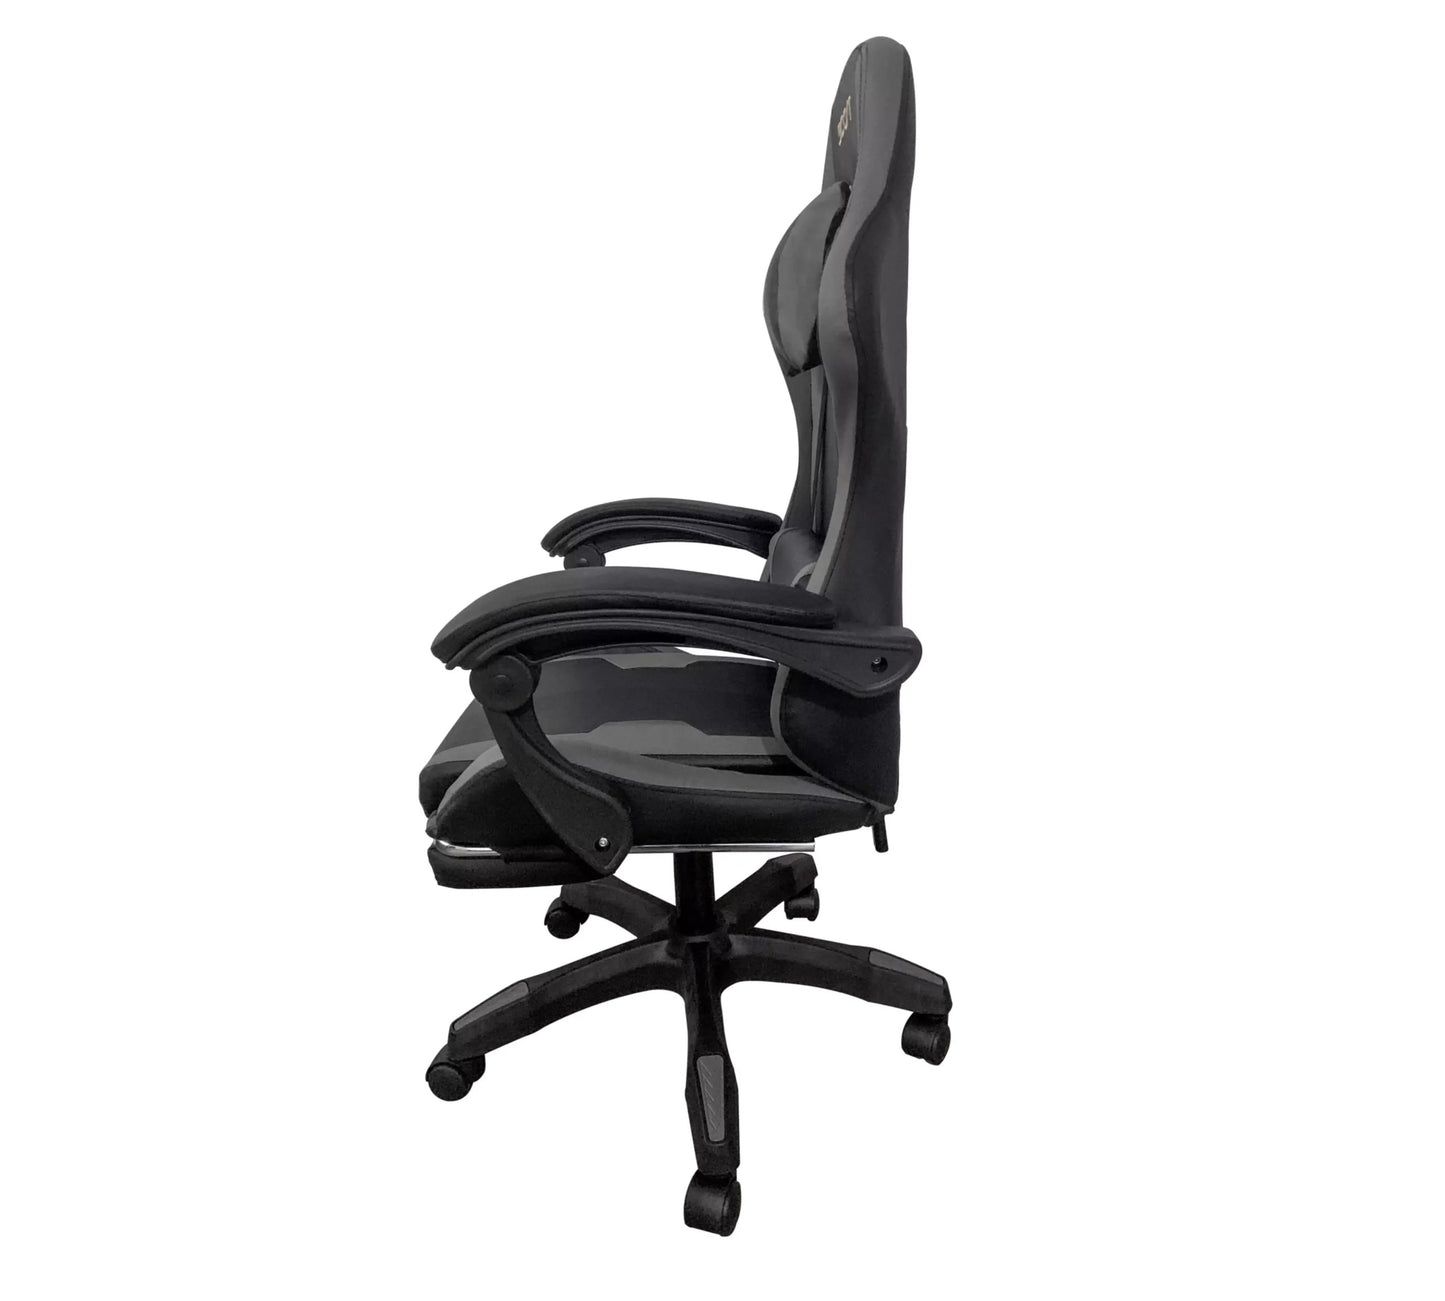 Best Quality Boost Surge Gaming Chair Price in Pakistan